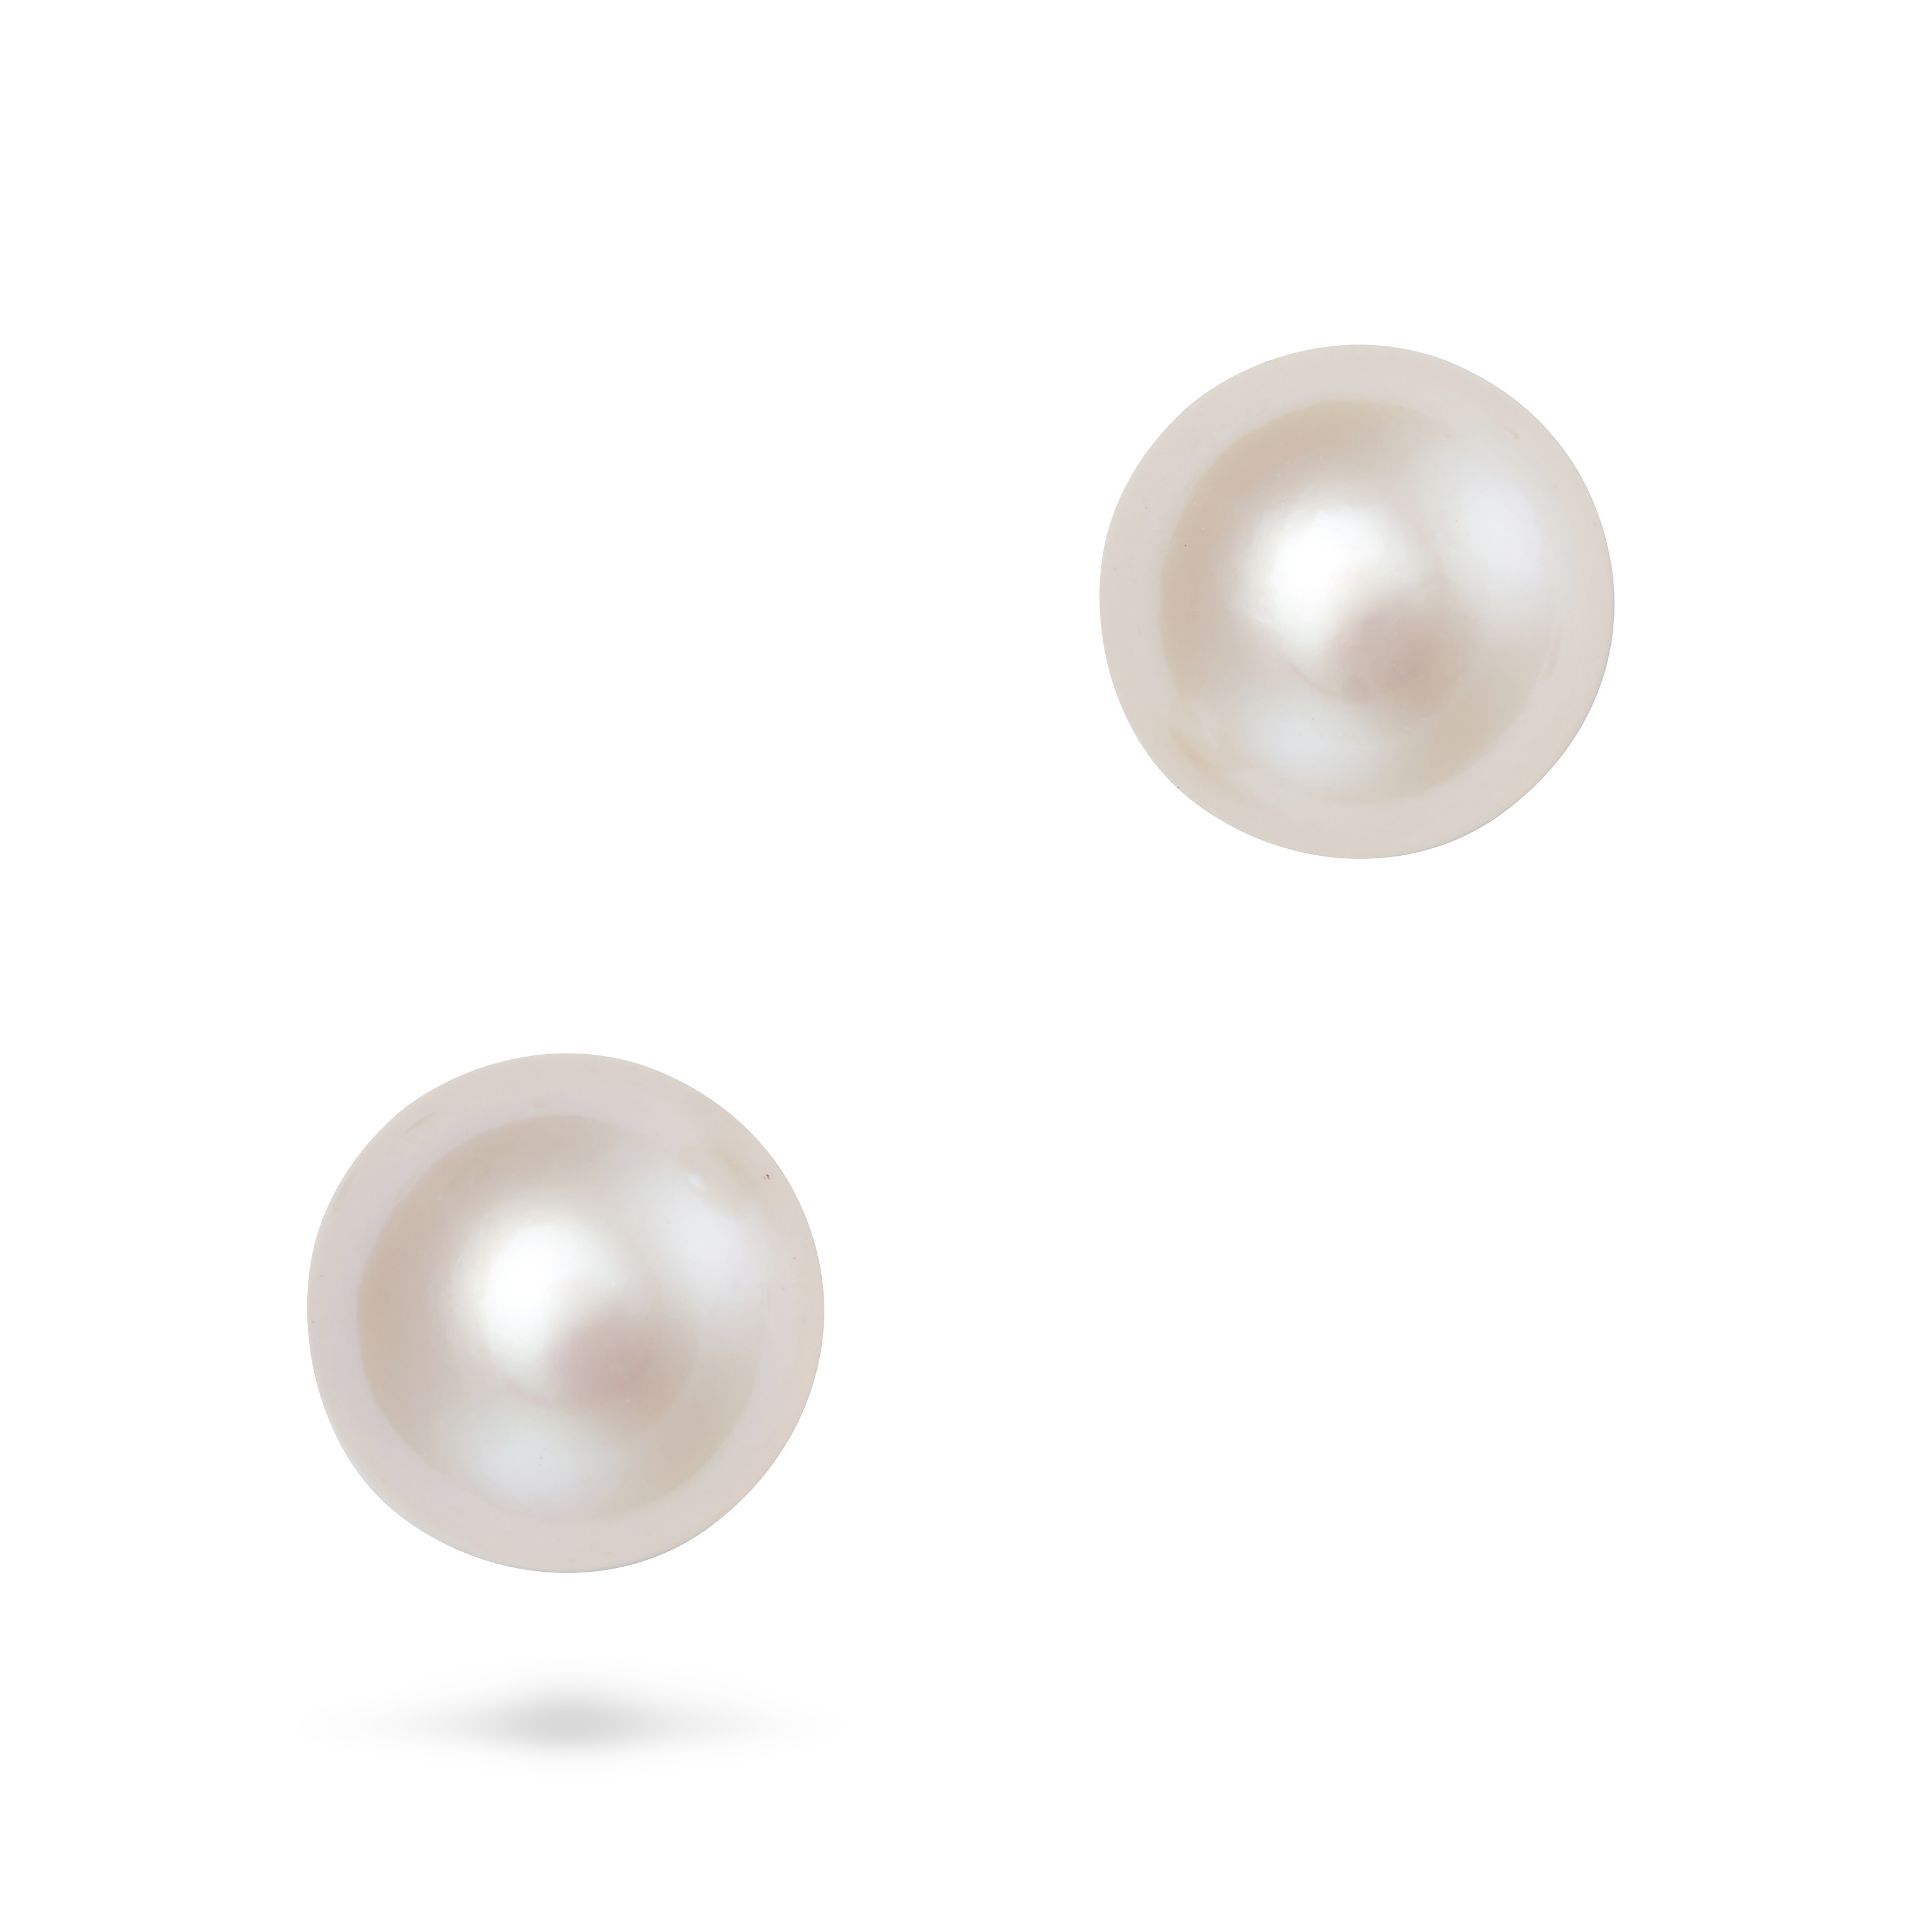 NO RESERVE - A PAIR OF PEARL STUD EARRINGS in 9ct yellow gold, each set with a pearl of 9.0mm, st...